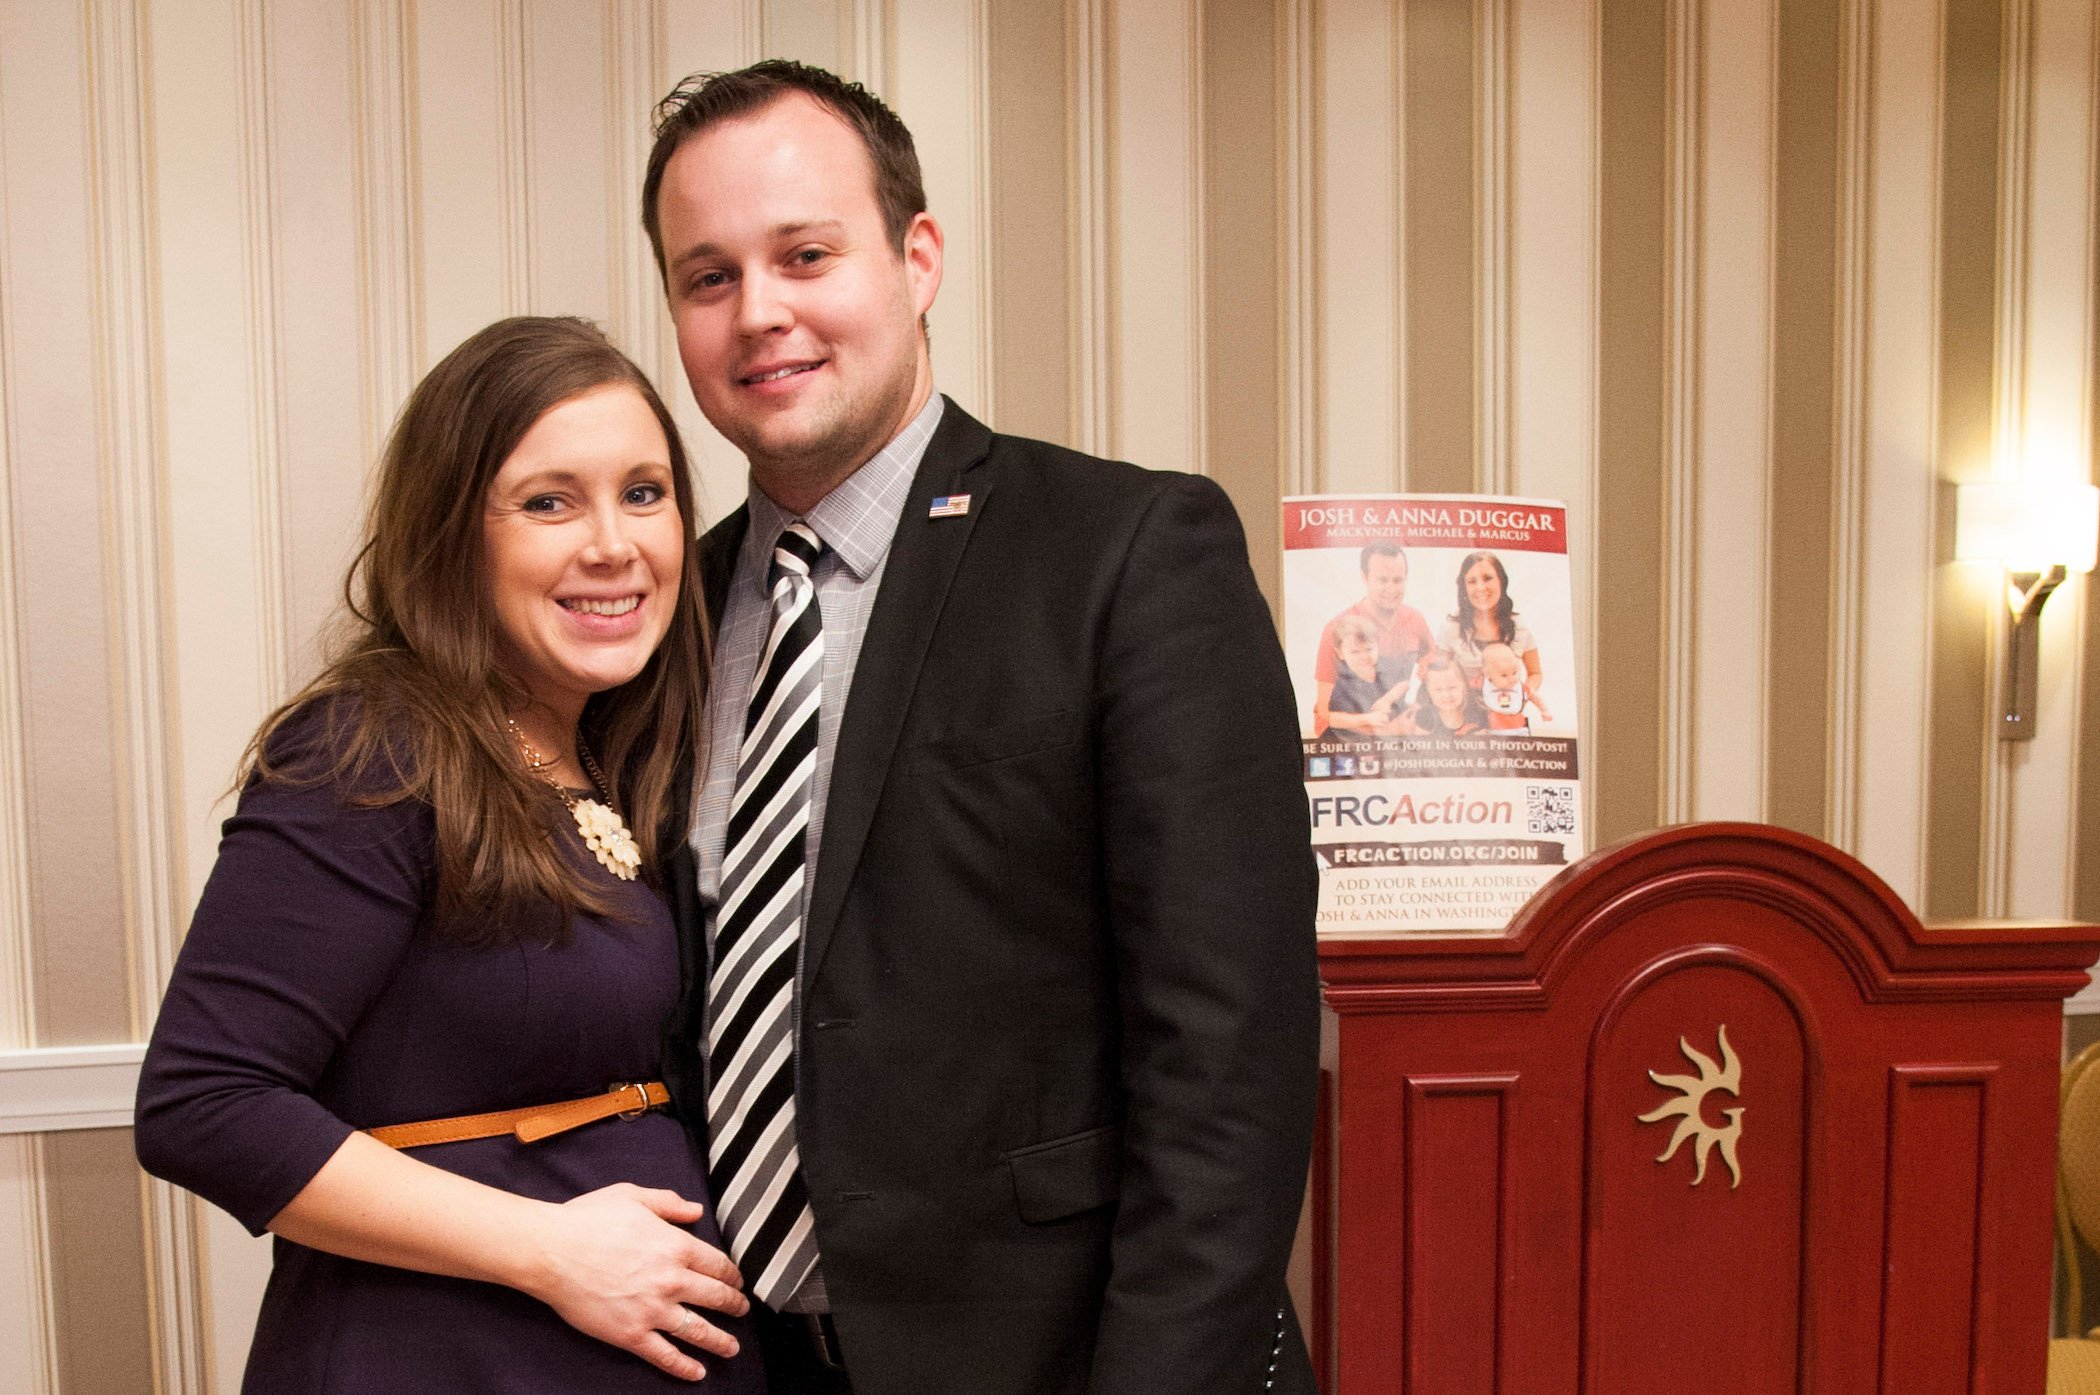 Anna Duggar and Josh Duggar posing at a conference. Anna Duggar is holding her pregnant belly